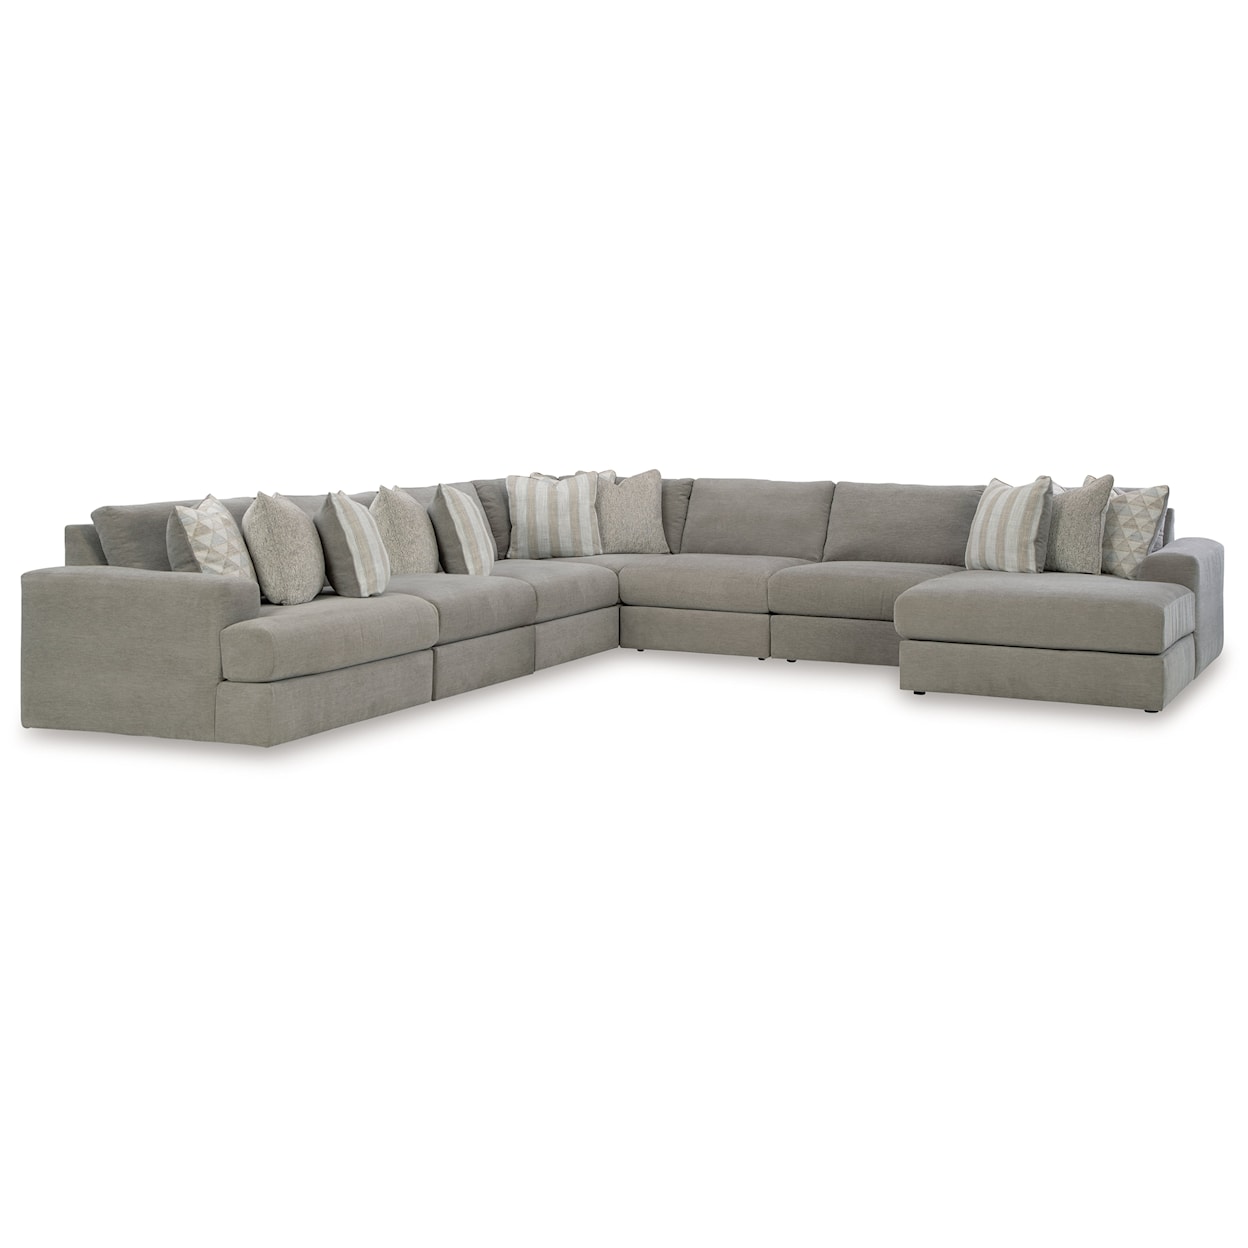 Benchcraft Avaliyah 7-Piece Sectional With Chaise